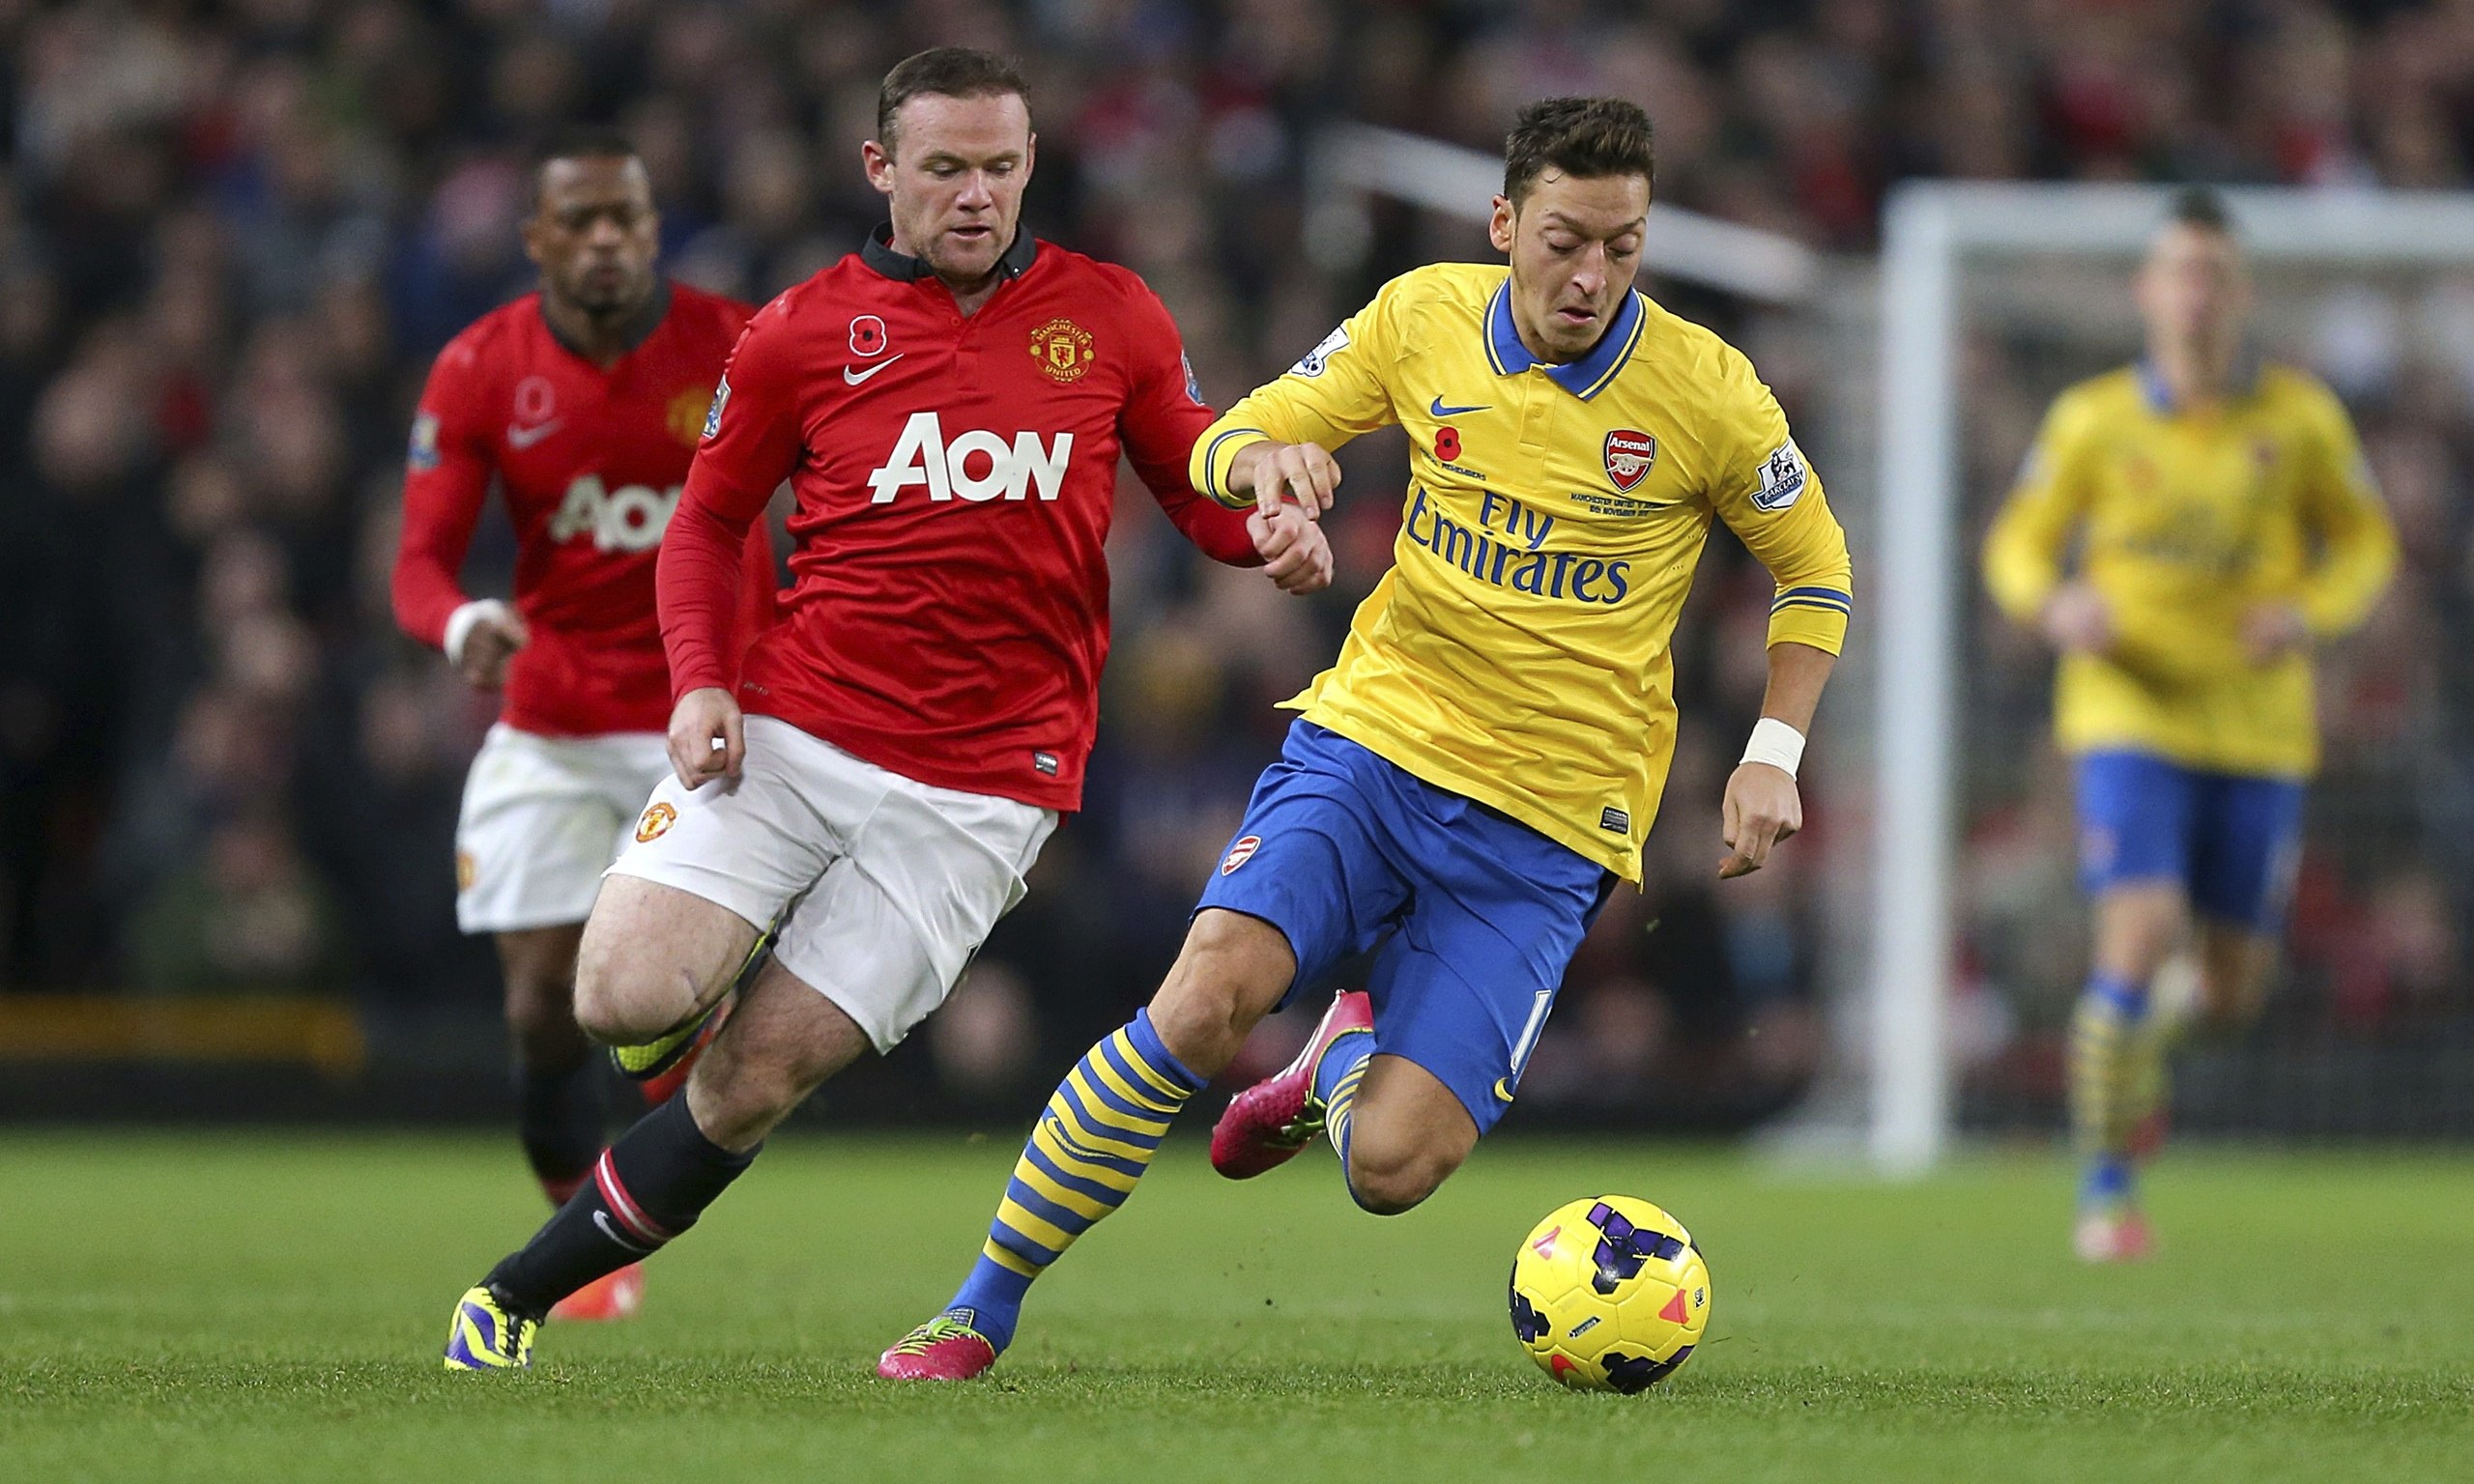 Manchester United v Arsenal: five talking points from Old Trafford 